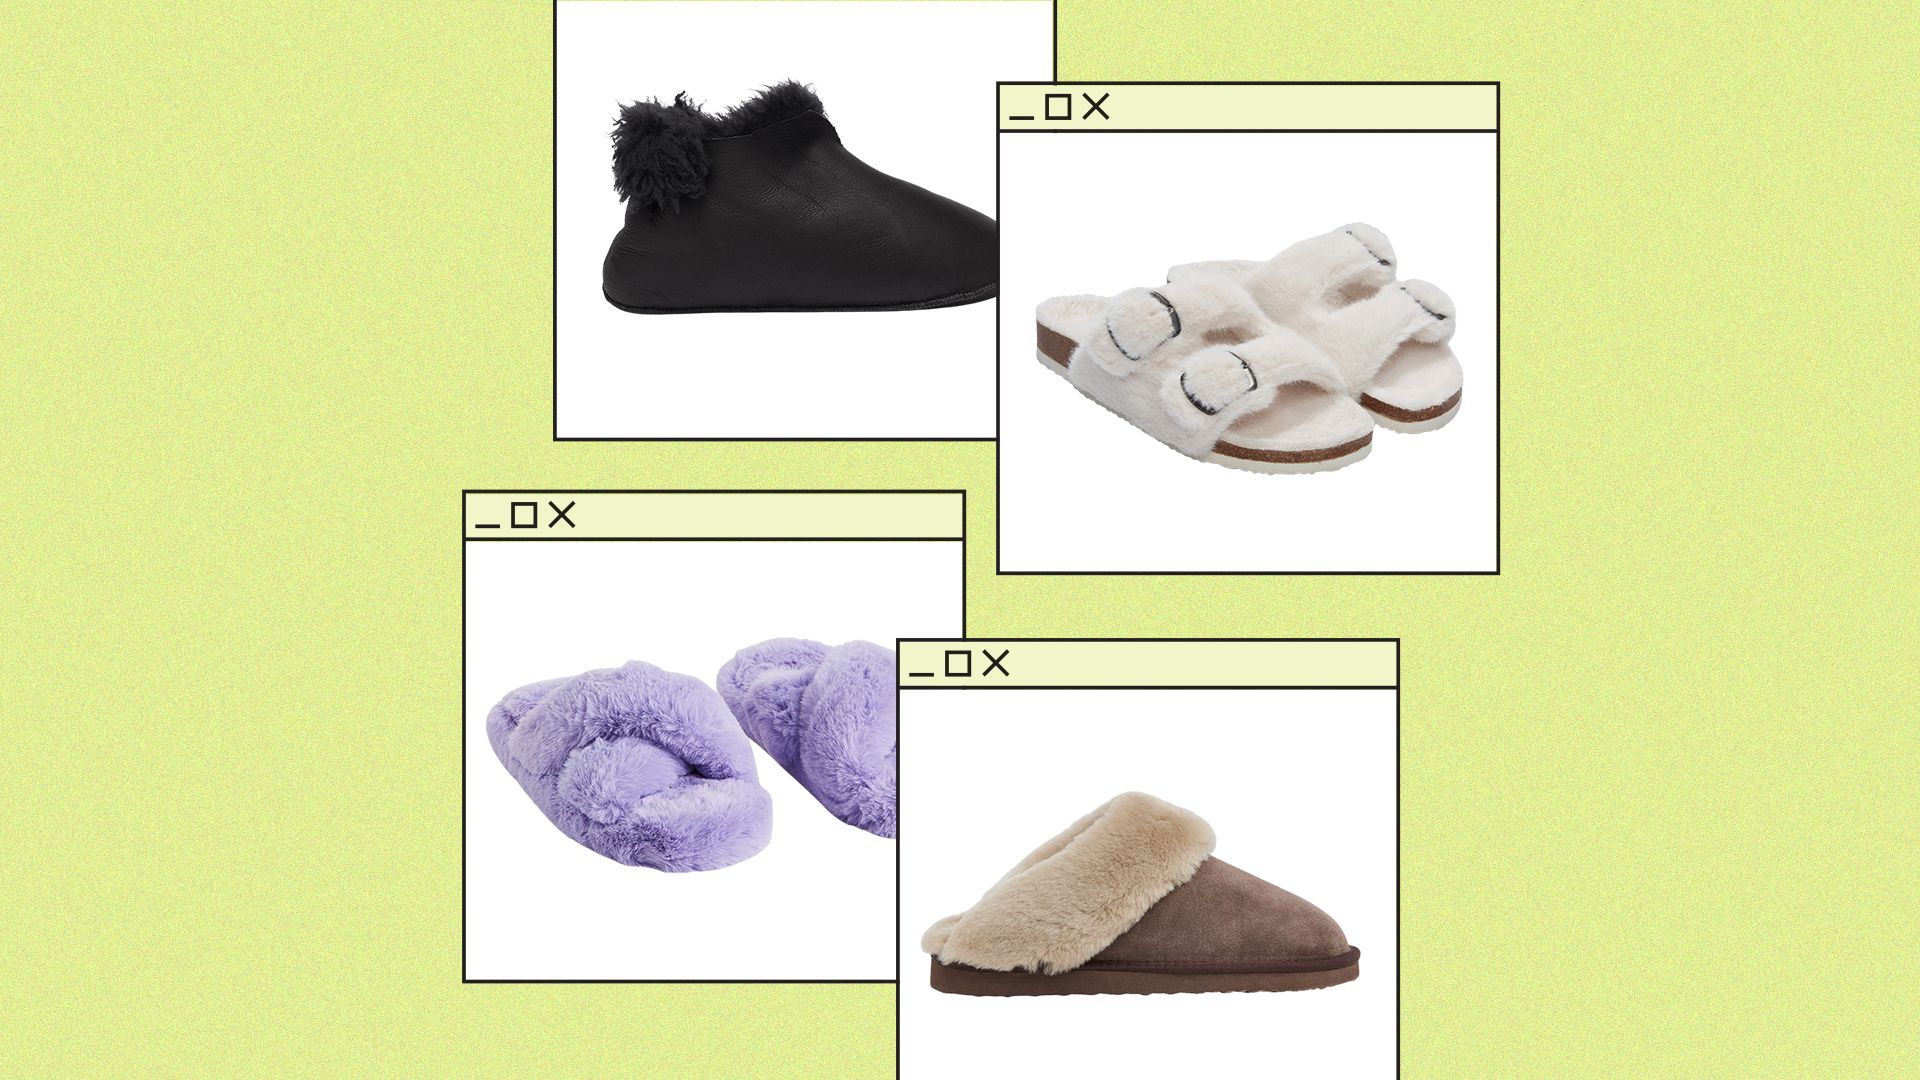 18 Best Fuzzy Slippers To Treat Your Feet Right In 2022